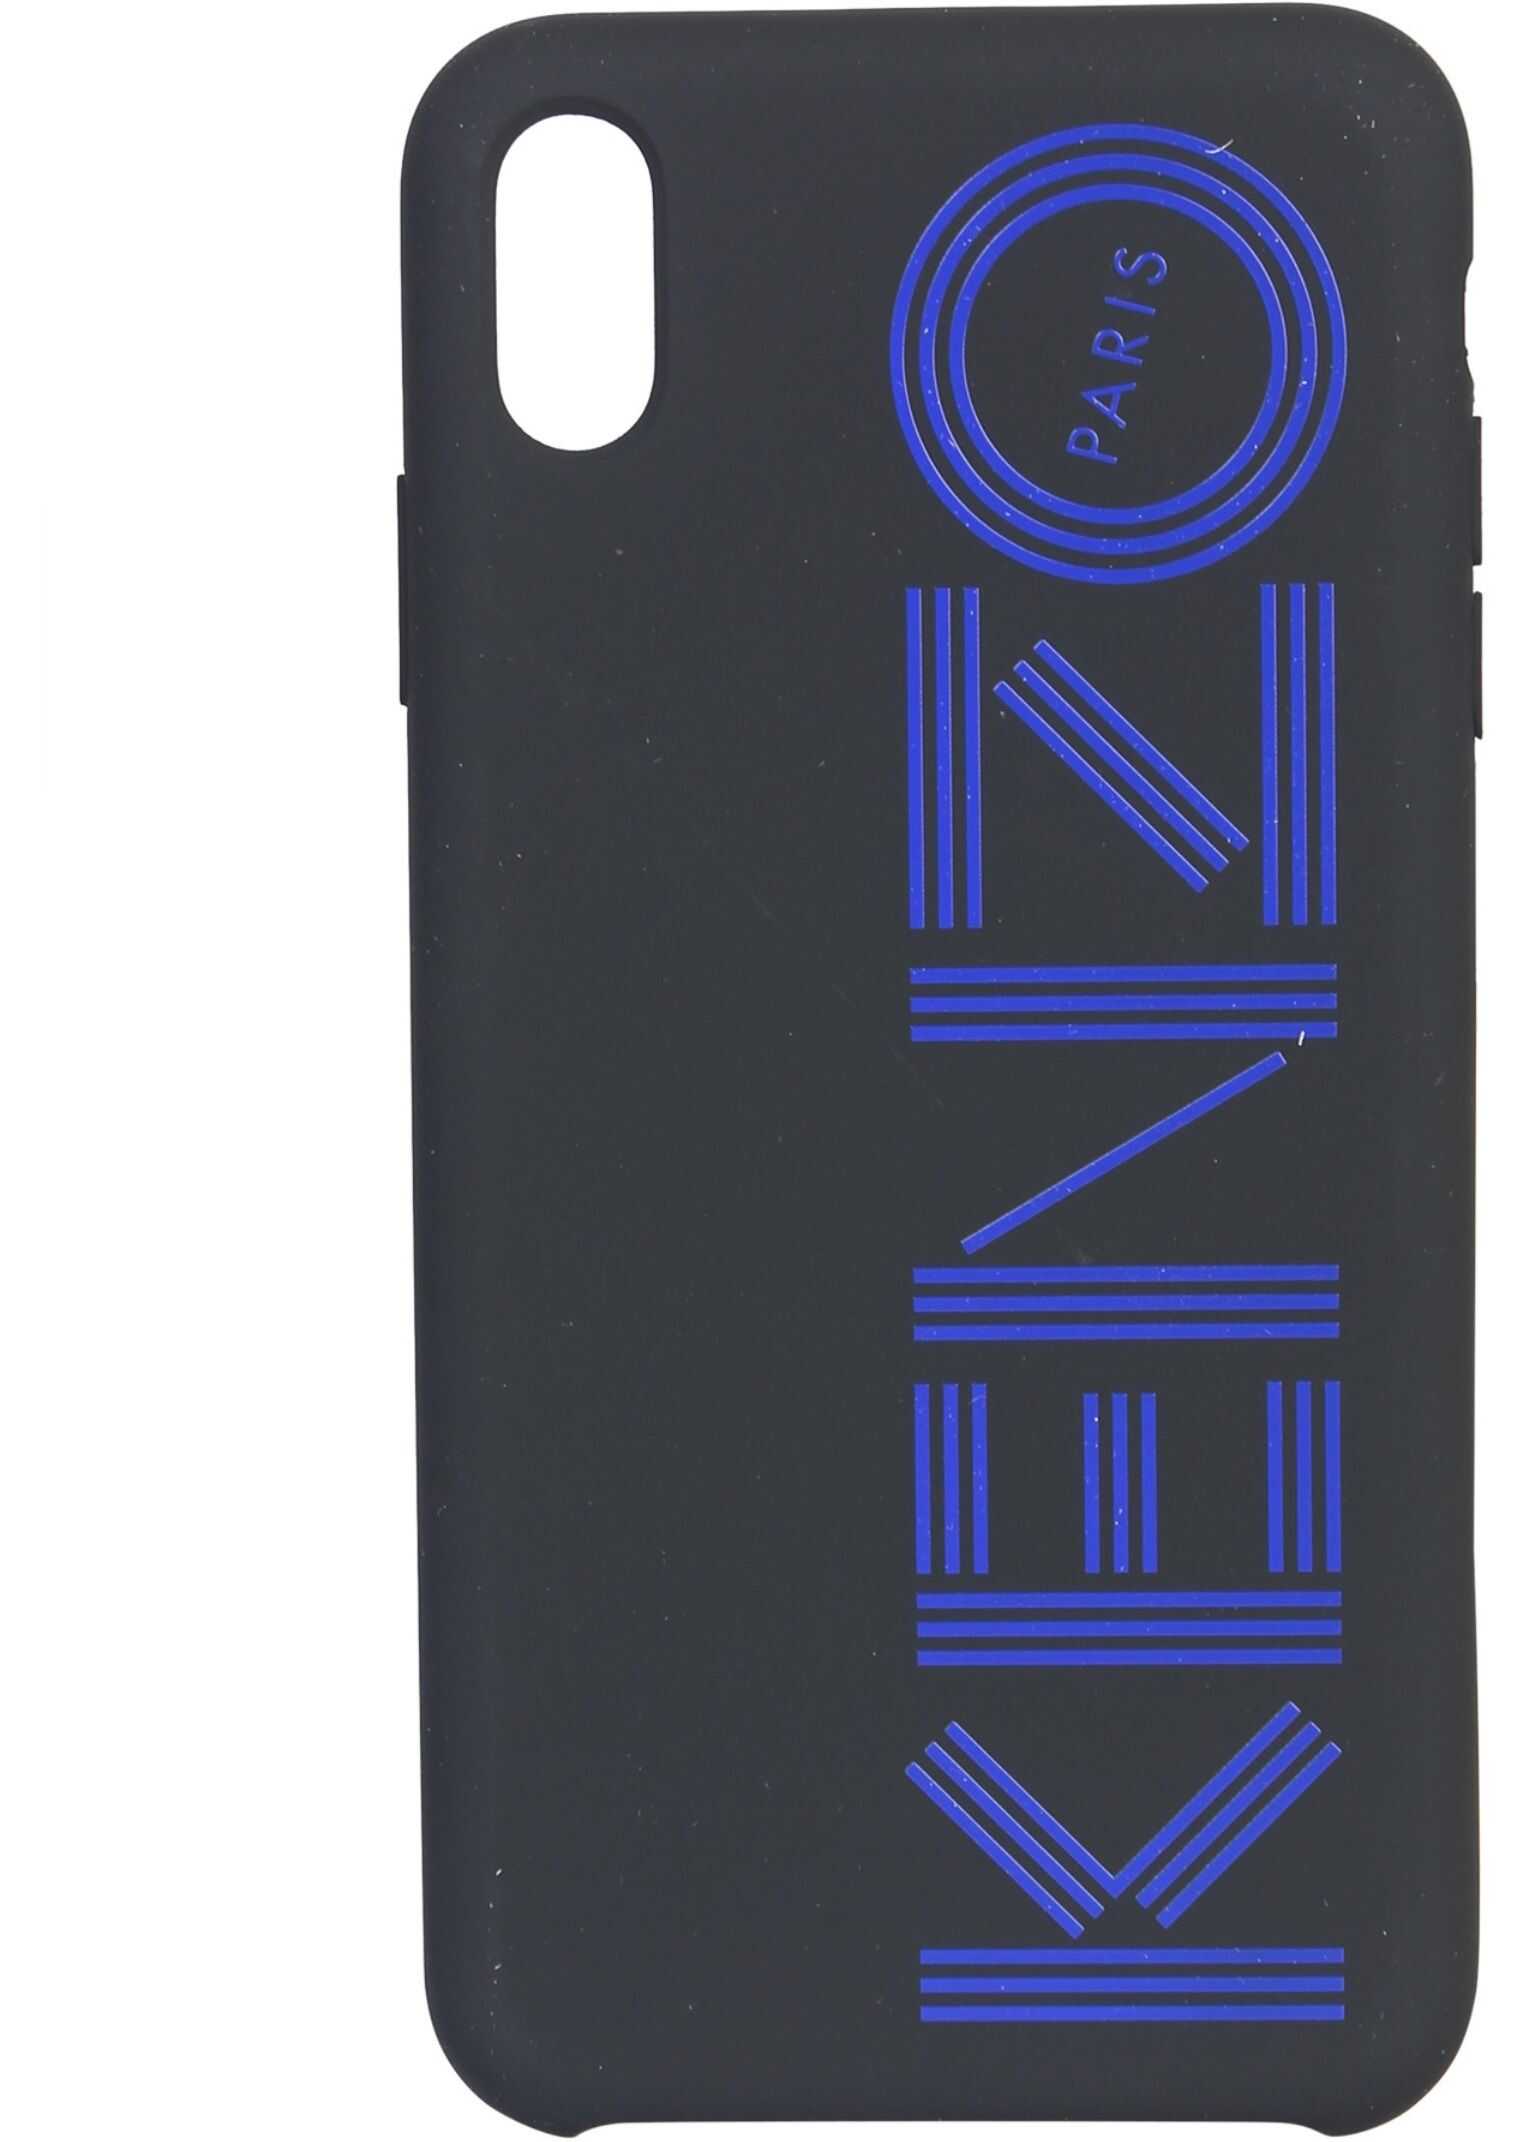 Kenzo Cover For Iphone Xs Max BLUE image10